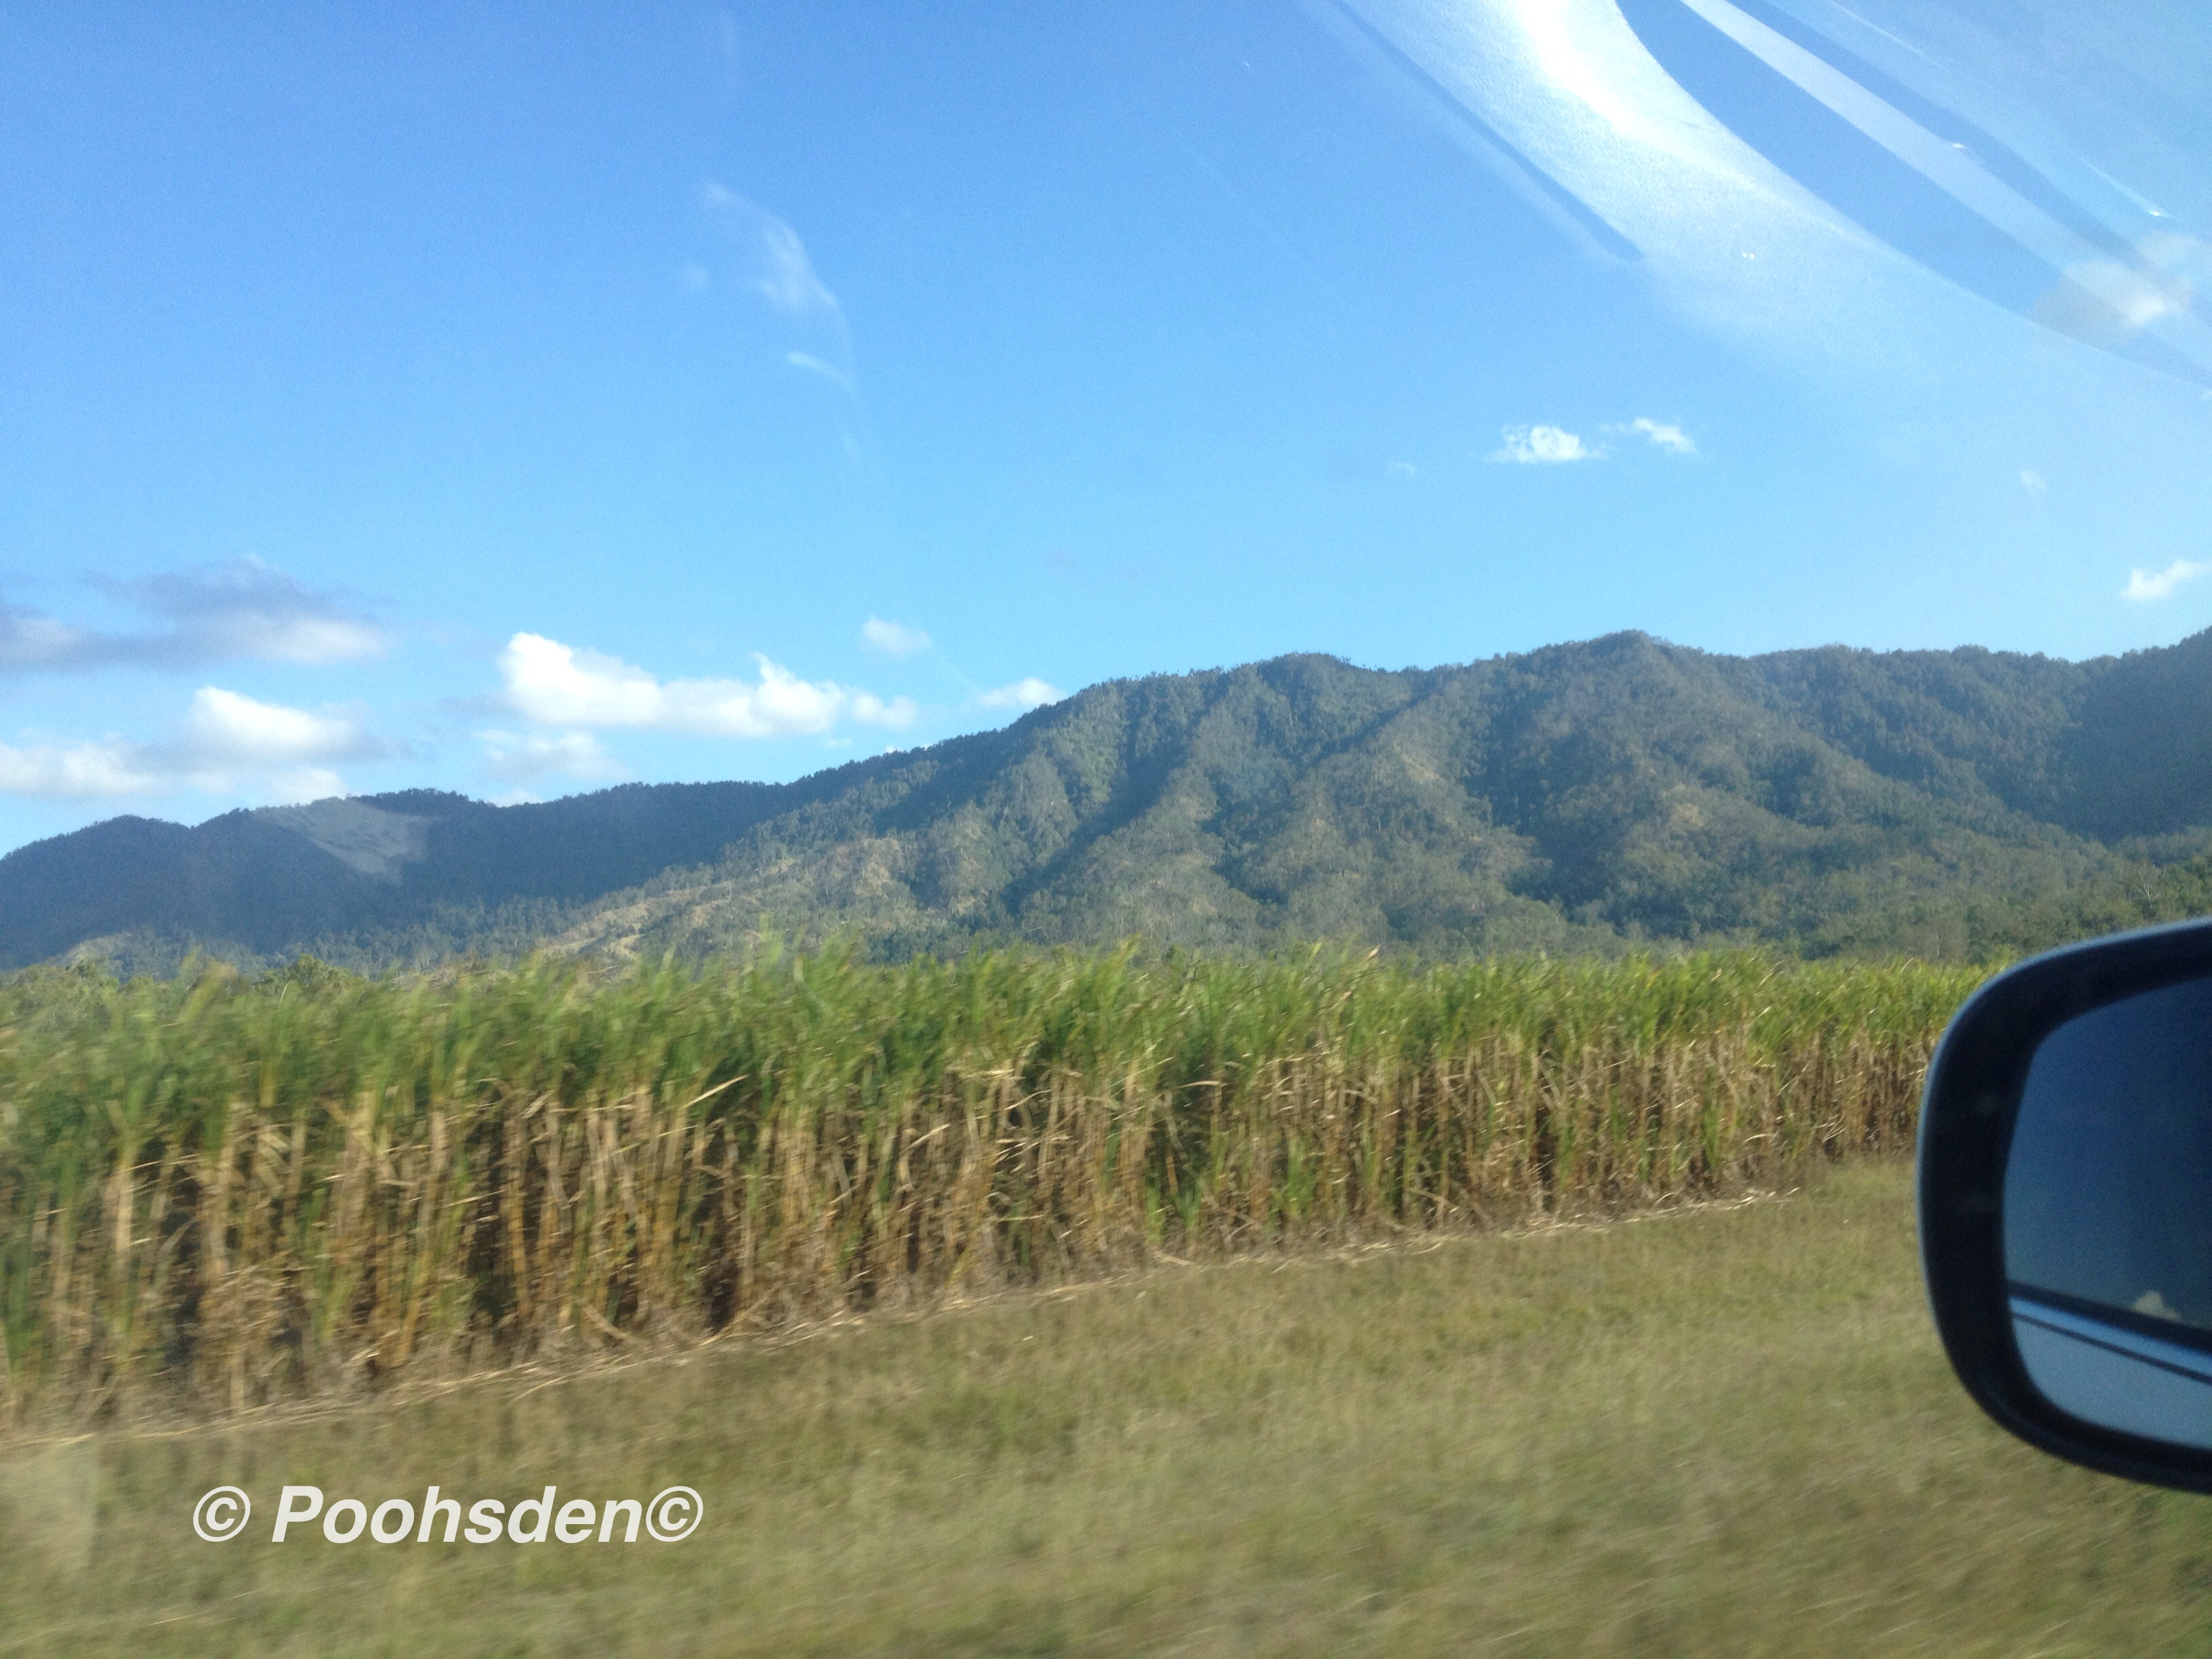 A picture of the cane fields from the car